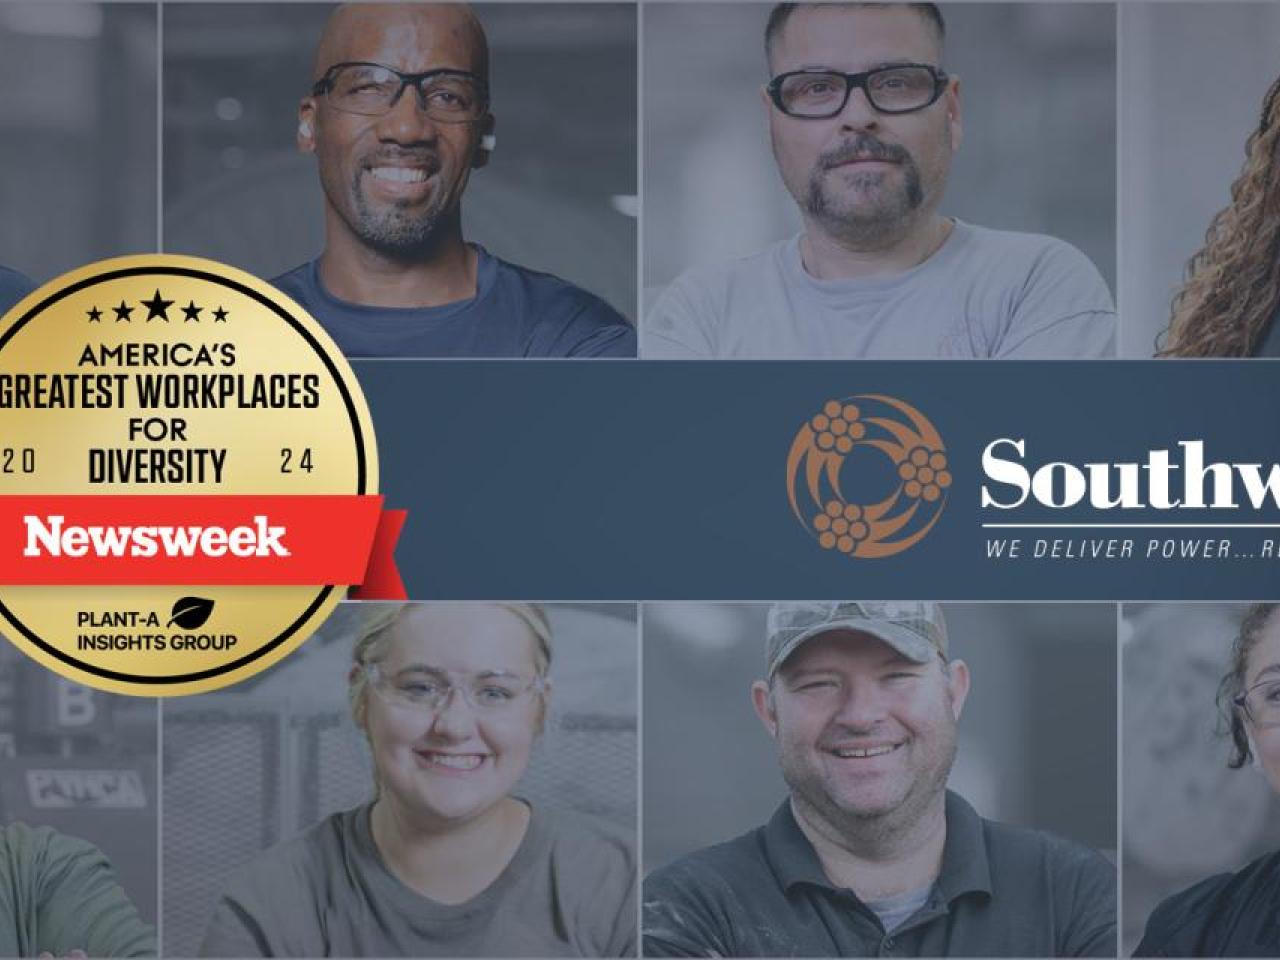 America's Greatest Workplaces for Diversity, Newsweek 2024, Southwire